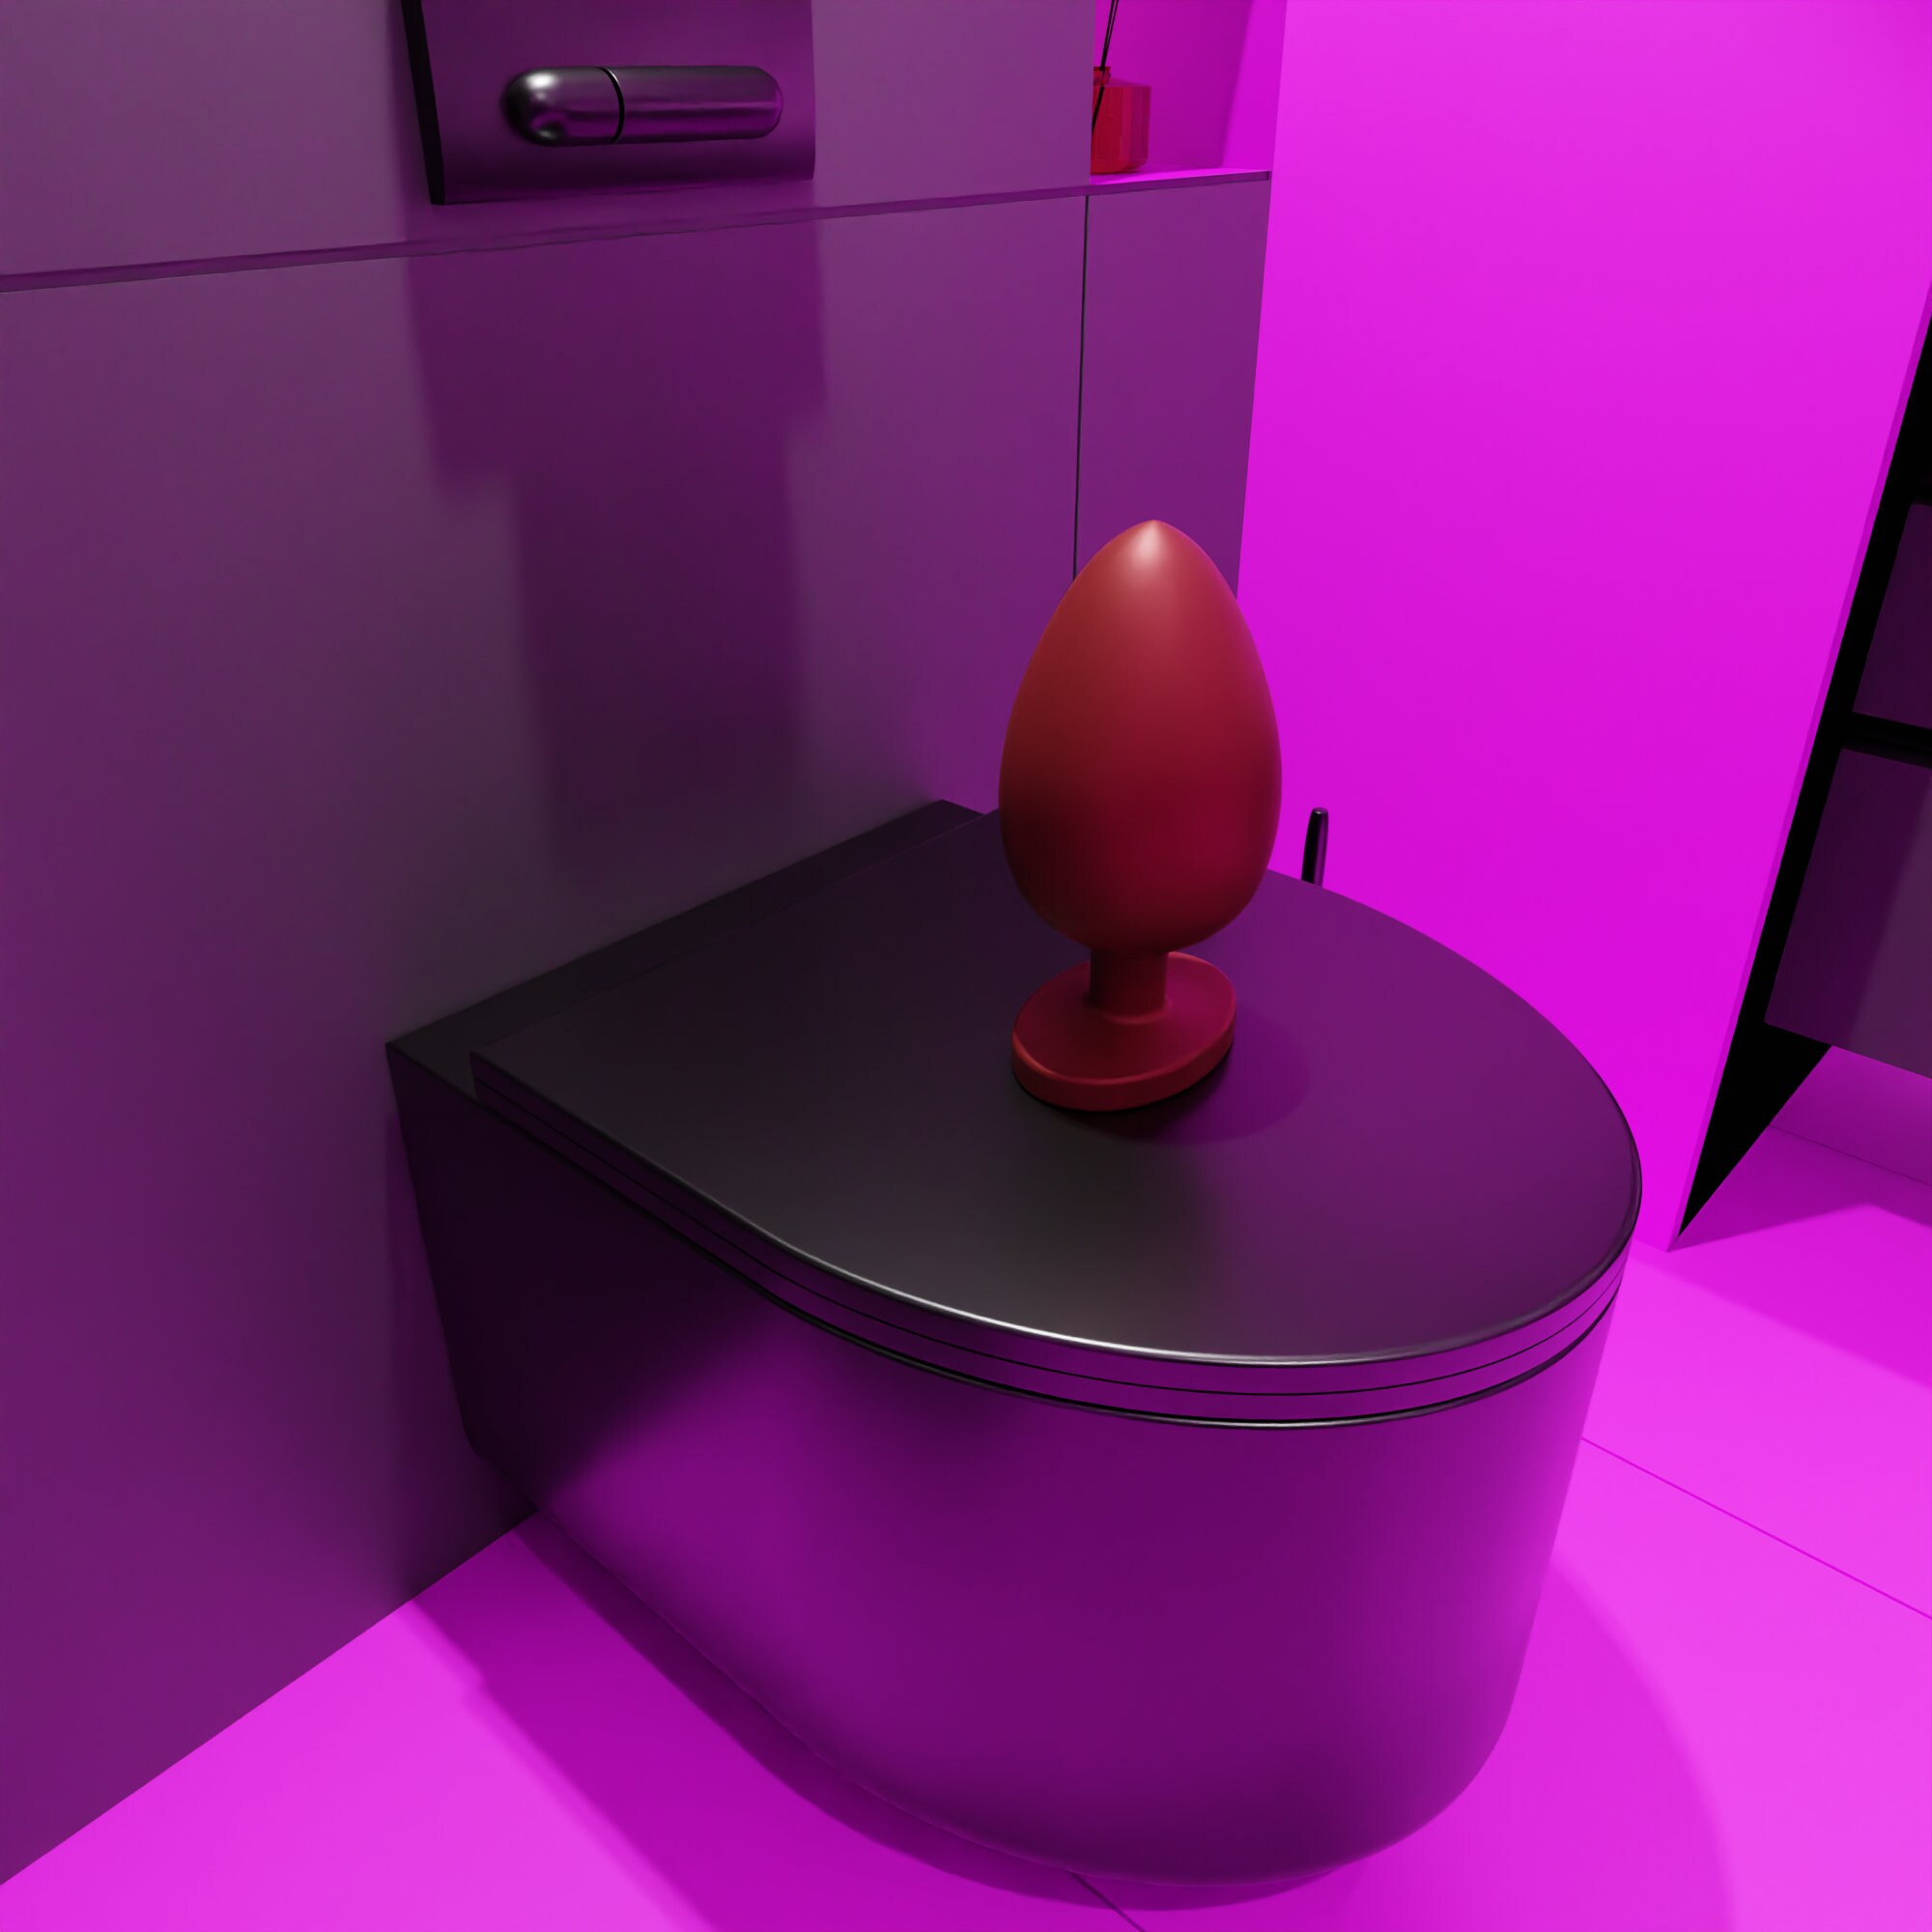 3d Anal Plug With 3d Stl Files And Ready To Print And Sex Toys 3d Print File Plug Anal Training 3395